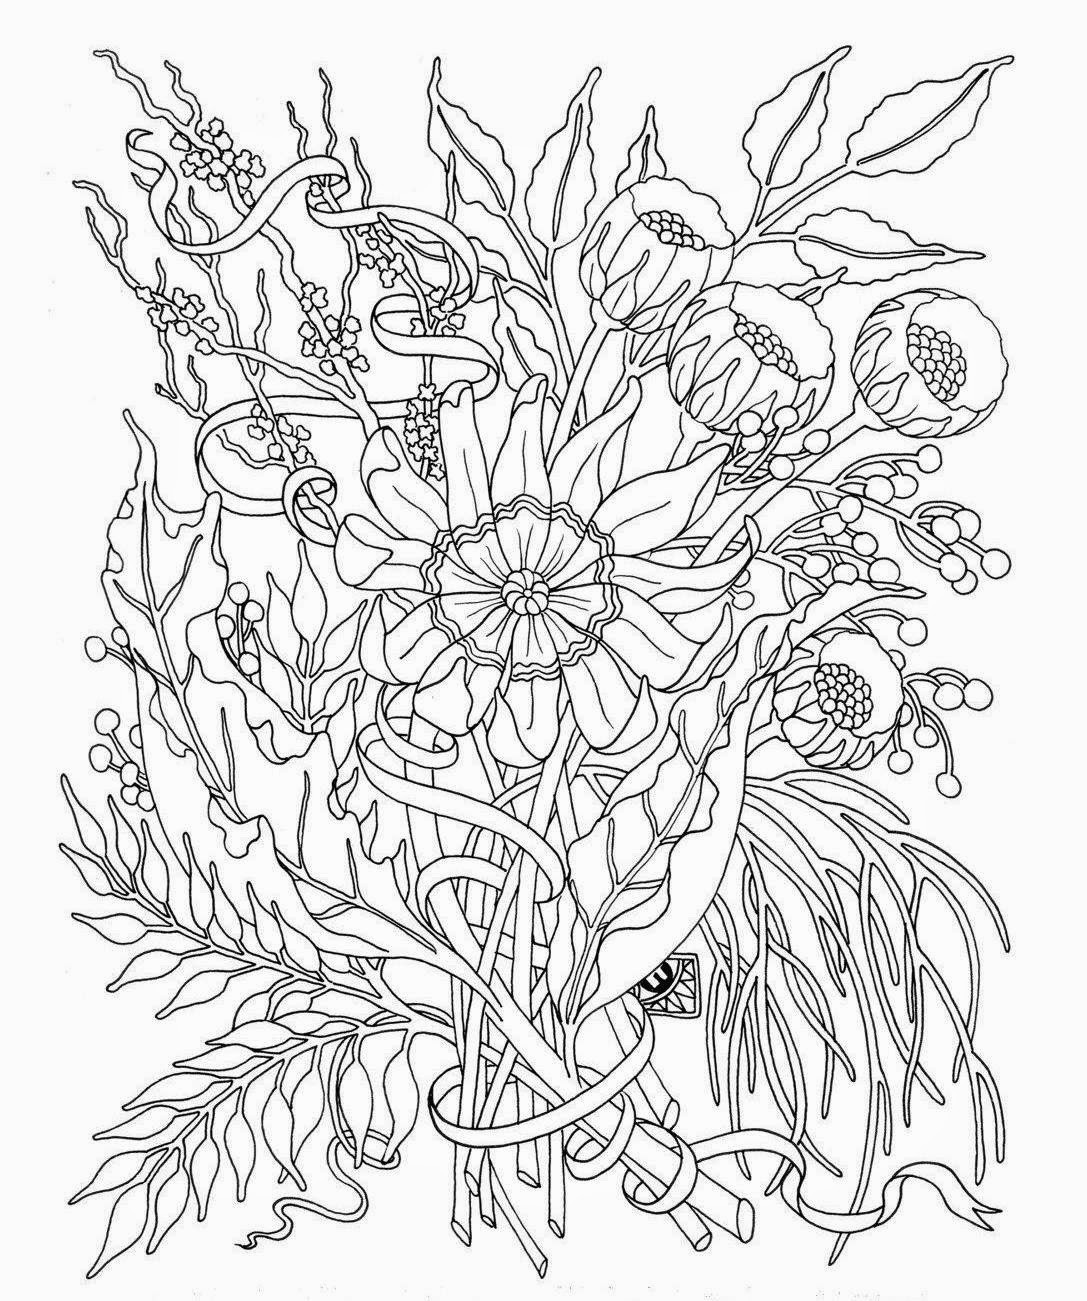 Drawing Picture Of Flower Vase Pichers Of Flowers Unique Best Vases Flower Vase Coloring Page Pages